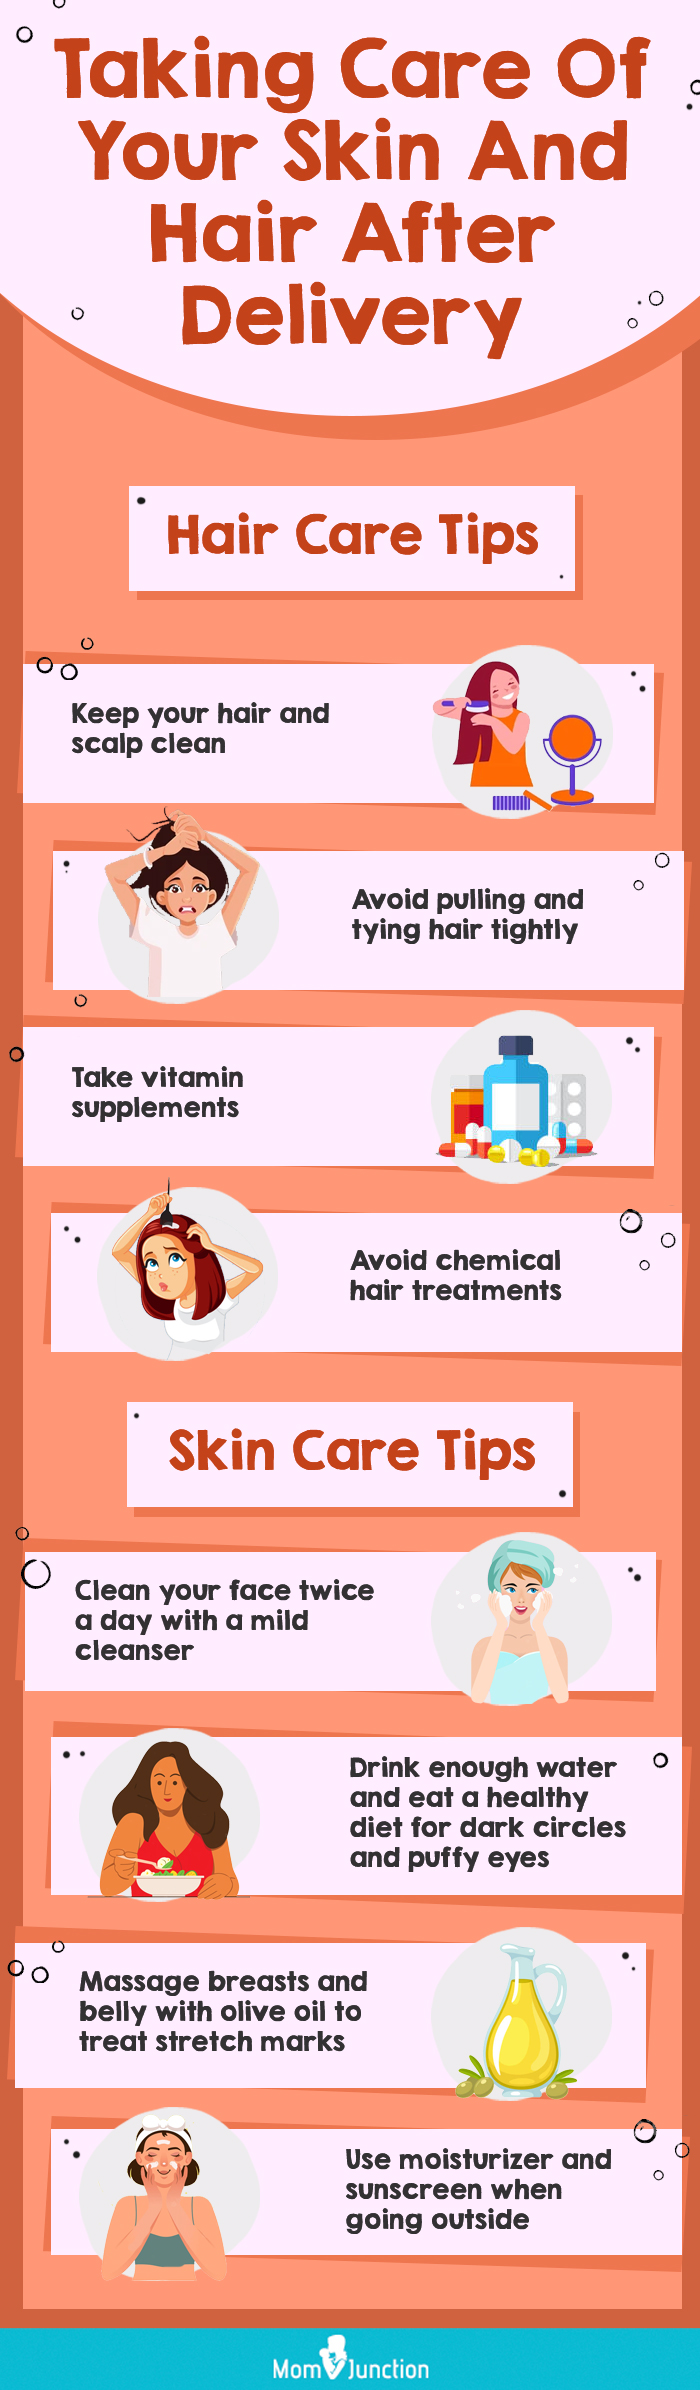 taking care of your skin and hair after delivery (infographic)